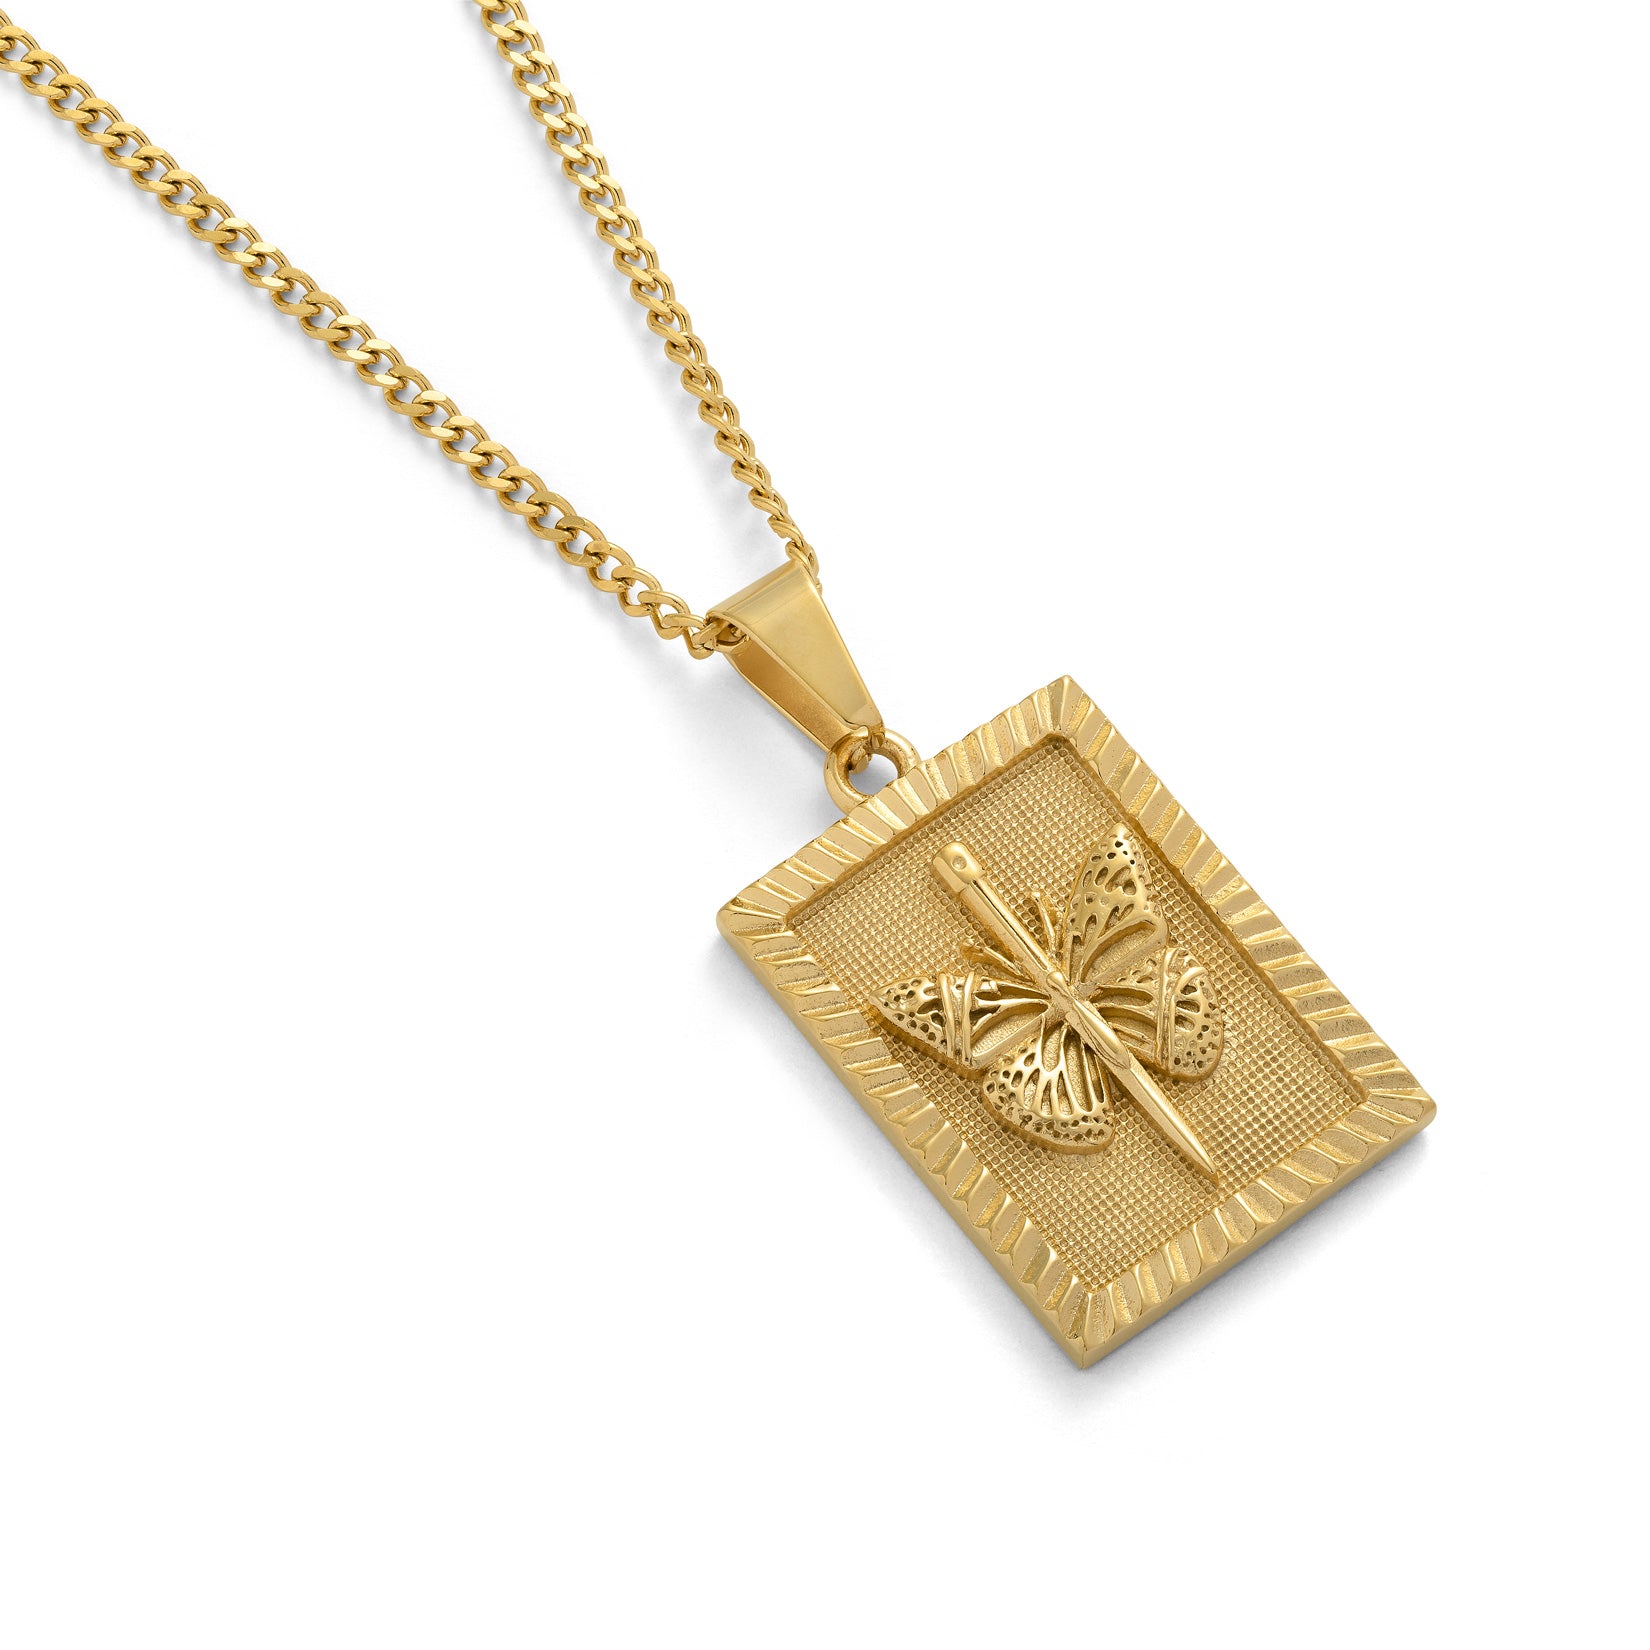 Butterfly pendant necklace in gold on white